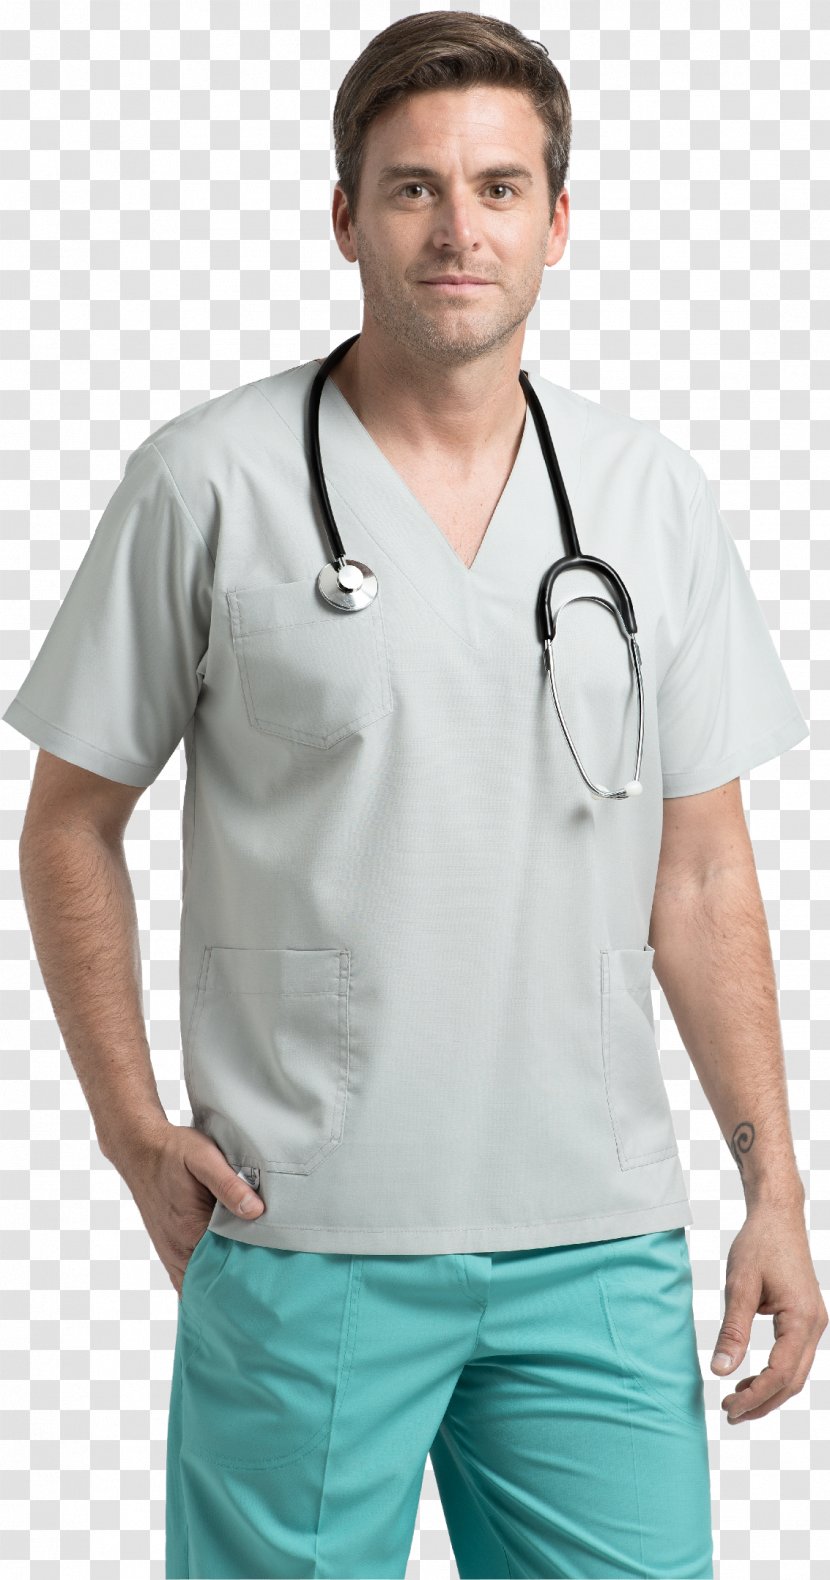 T-shirt Physician Lab Coats Stethoscope Scrubs Transparent PNG